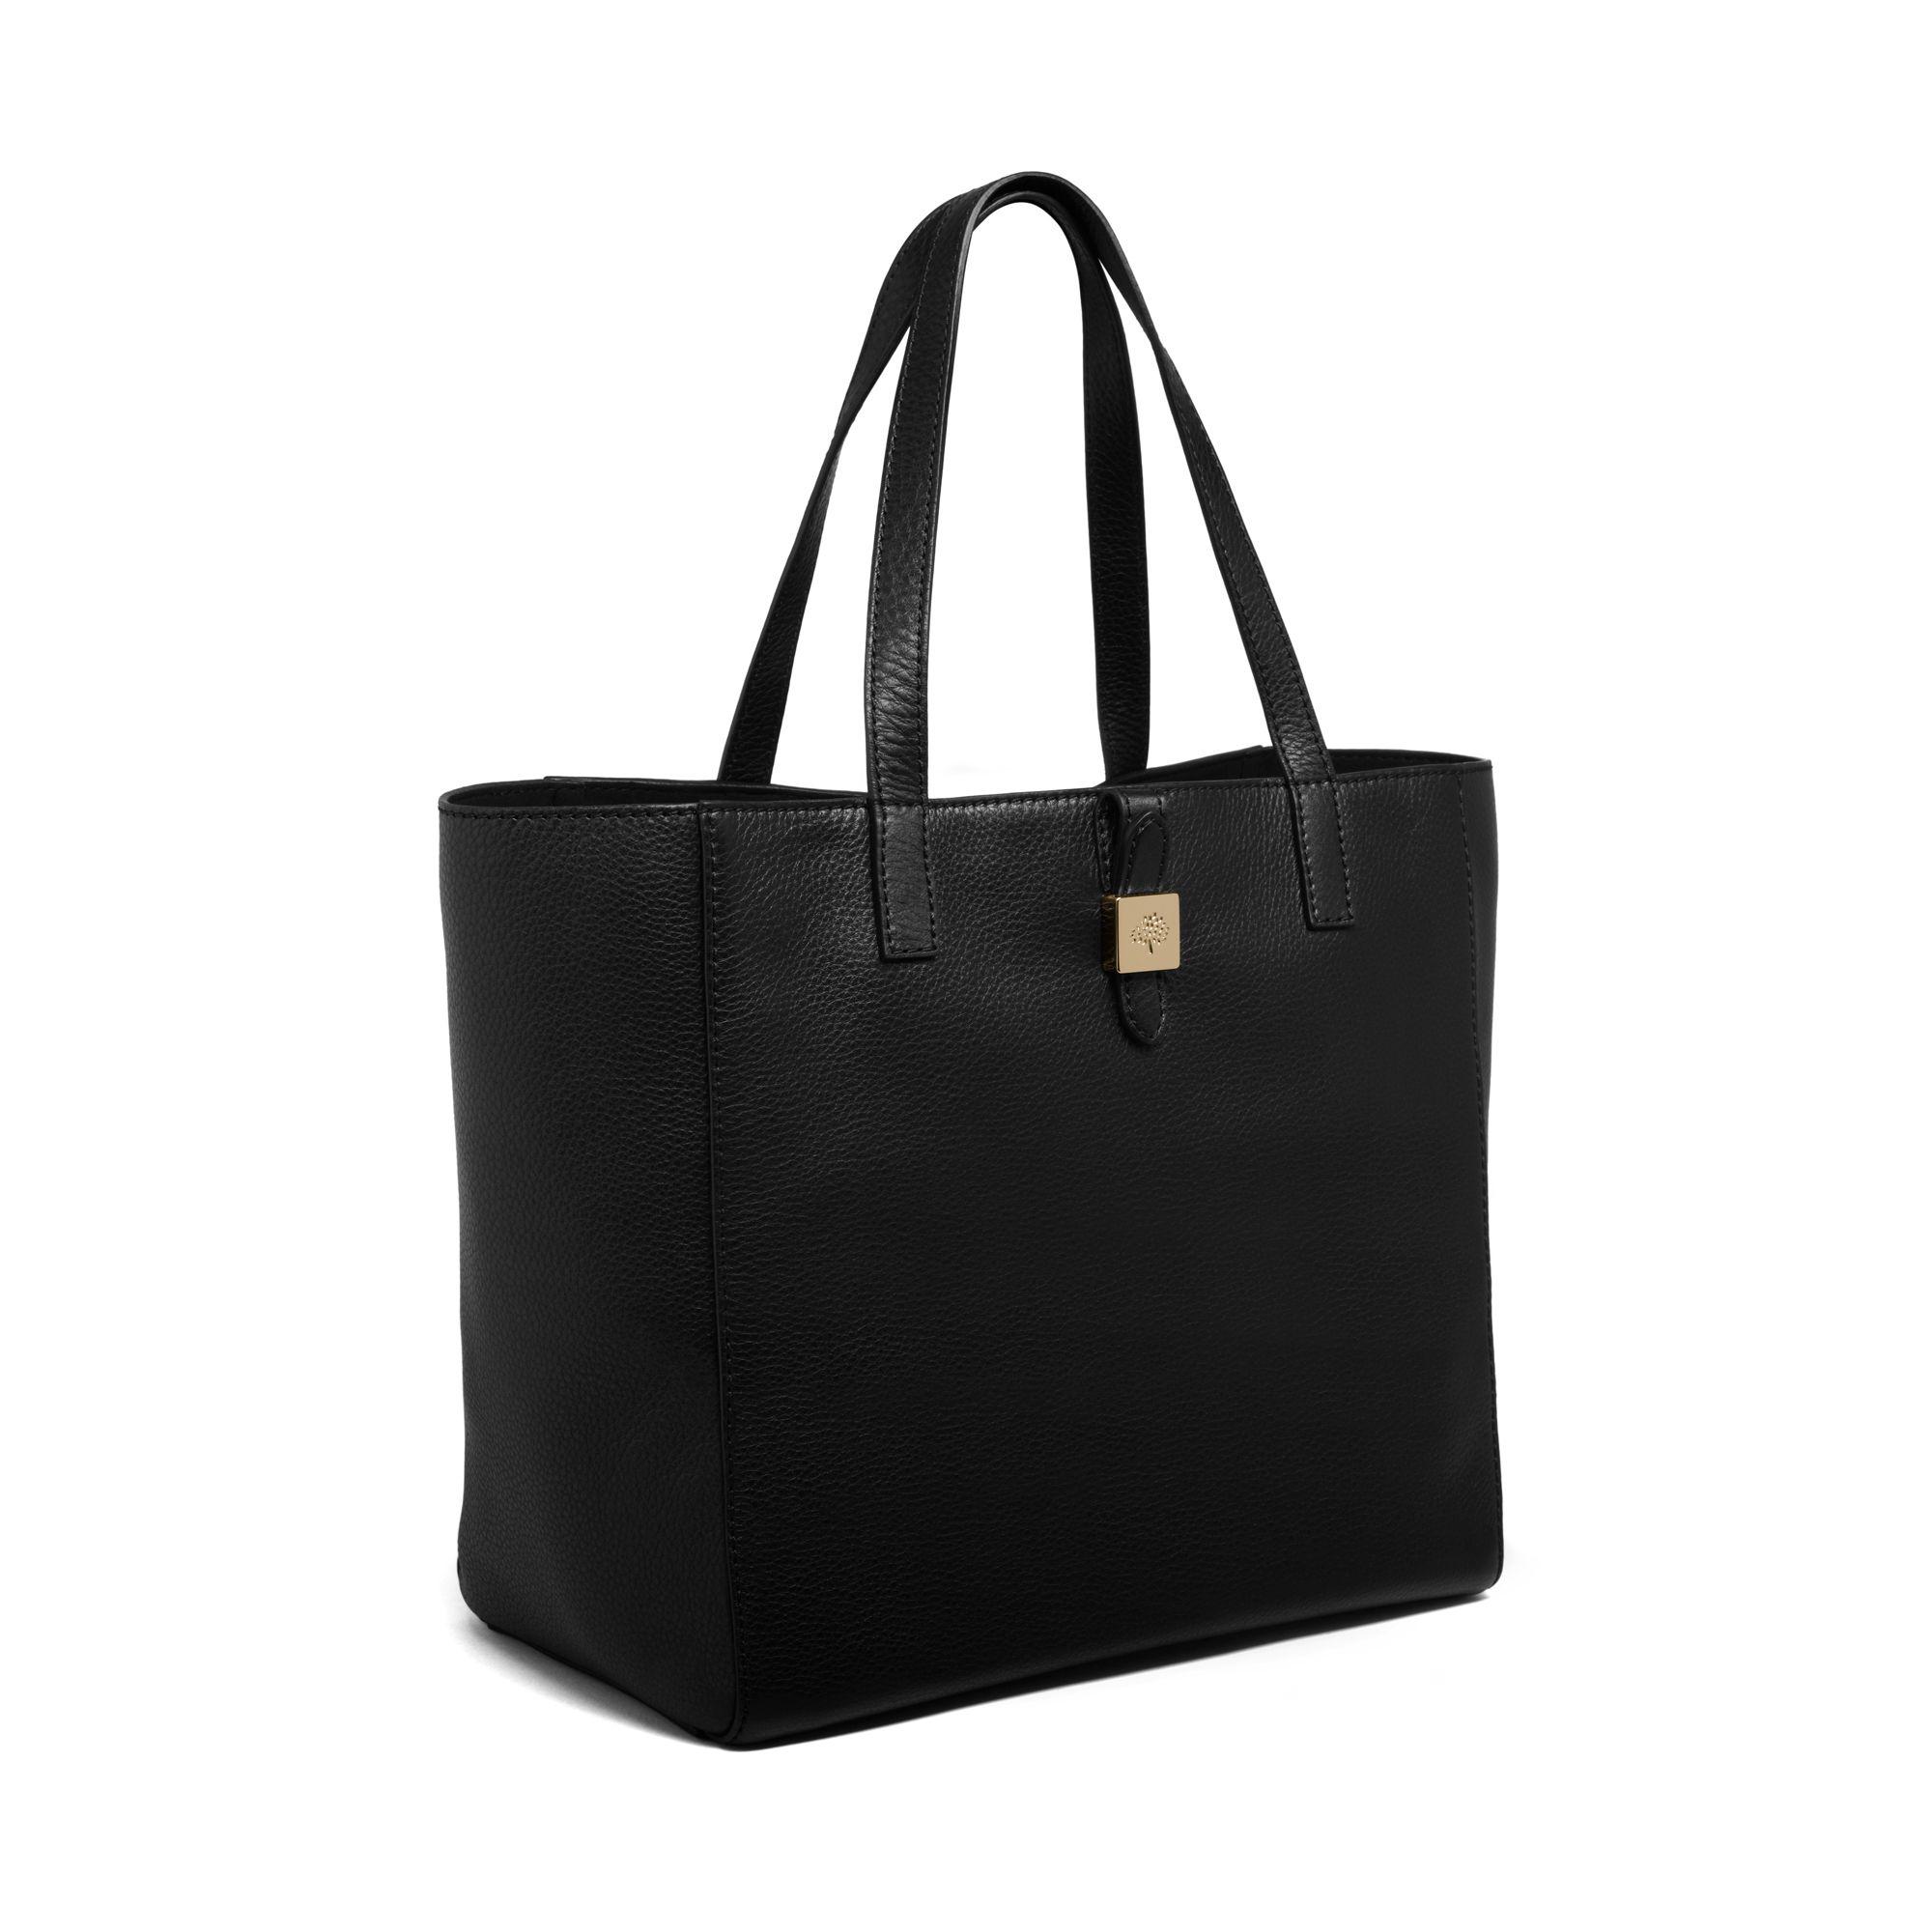 Mulberry Leather Tessie Tote in Black - Lyst